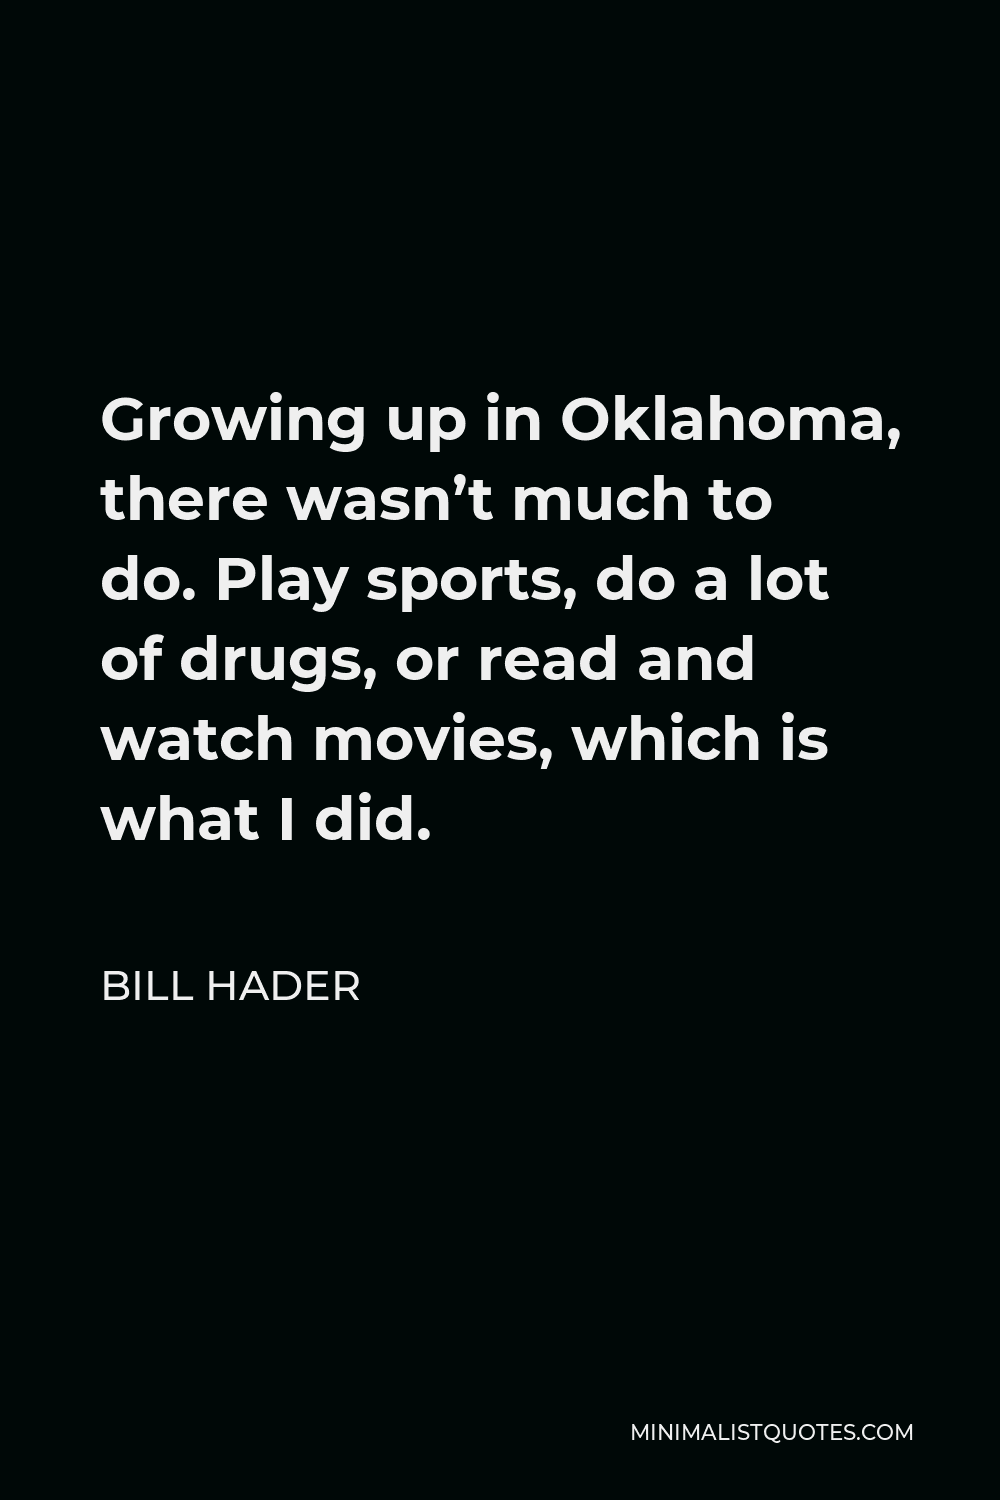 Bill Hader Quote - Growing up in Oklahoma, there wasn’t much to do. Play sports, do a lot of drugs, or read and watch movies, which is what I did.